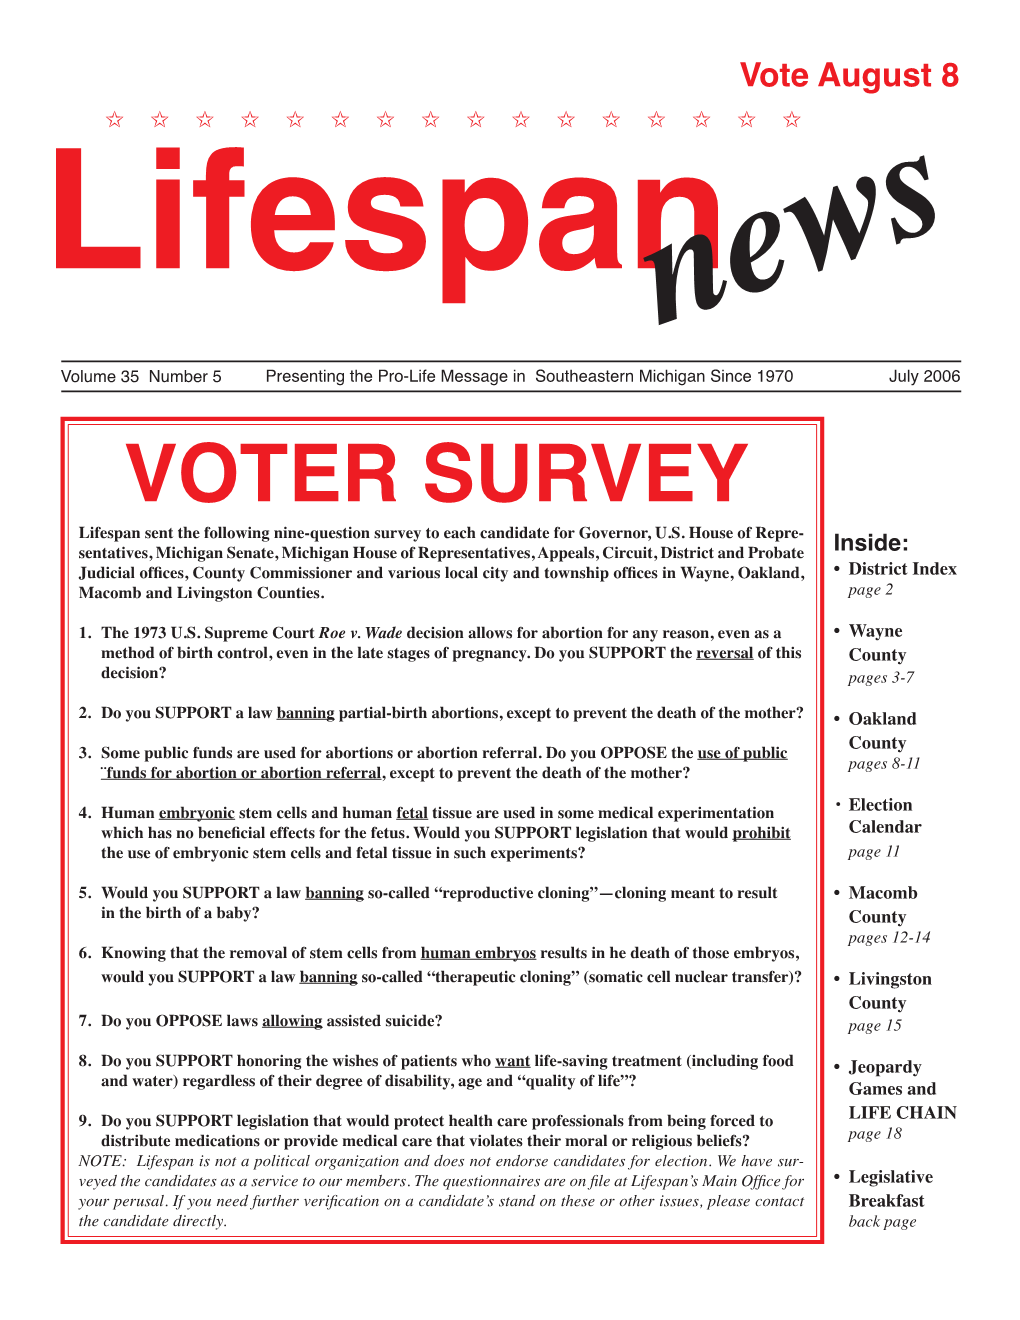 VOTER SURVEY Lifespan Sent the Following Nine-Question Survey to Each Candidate for Governor, U.S